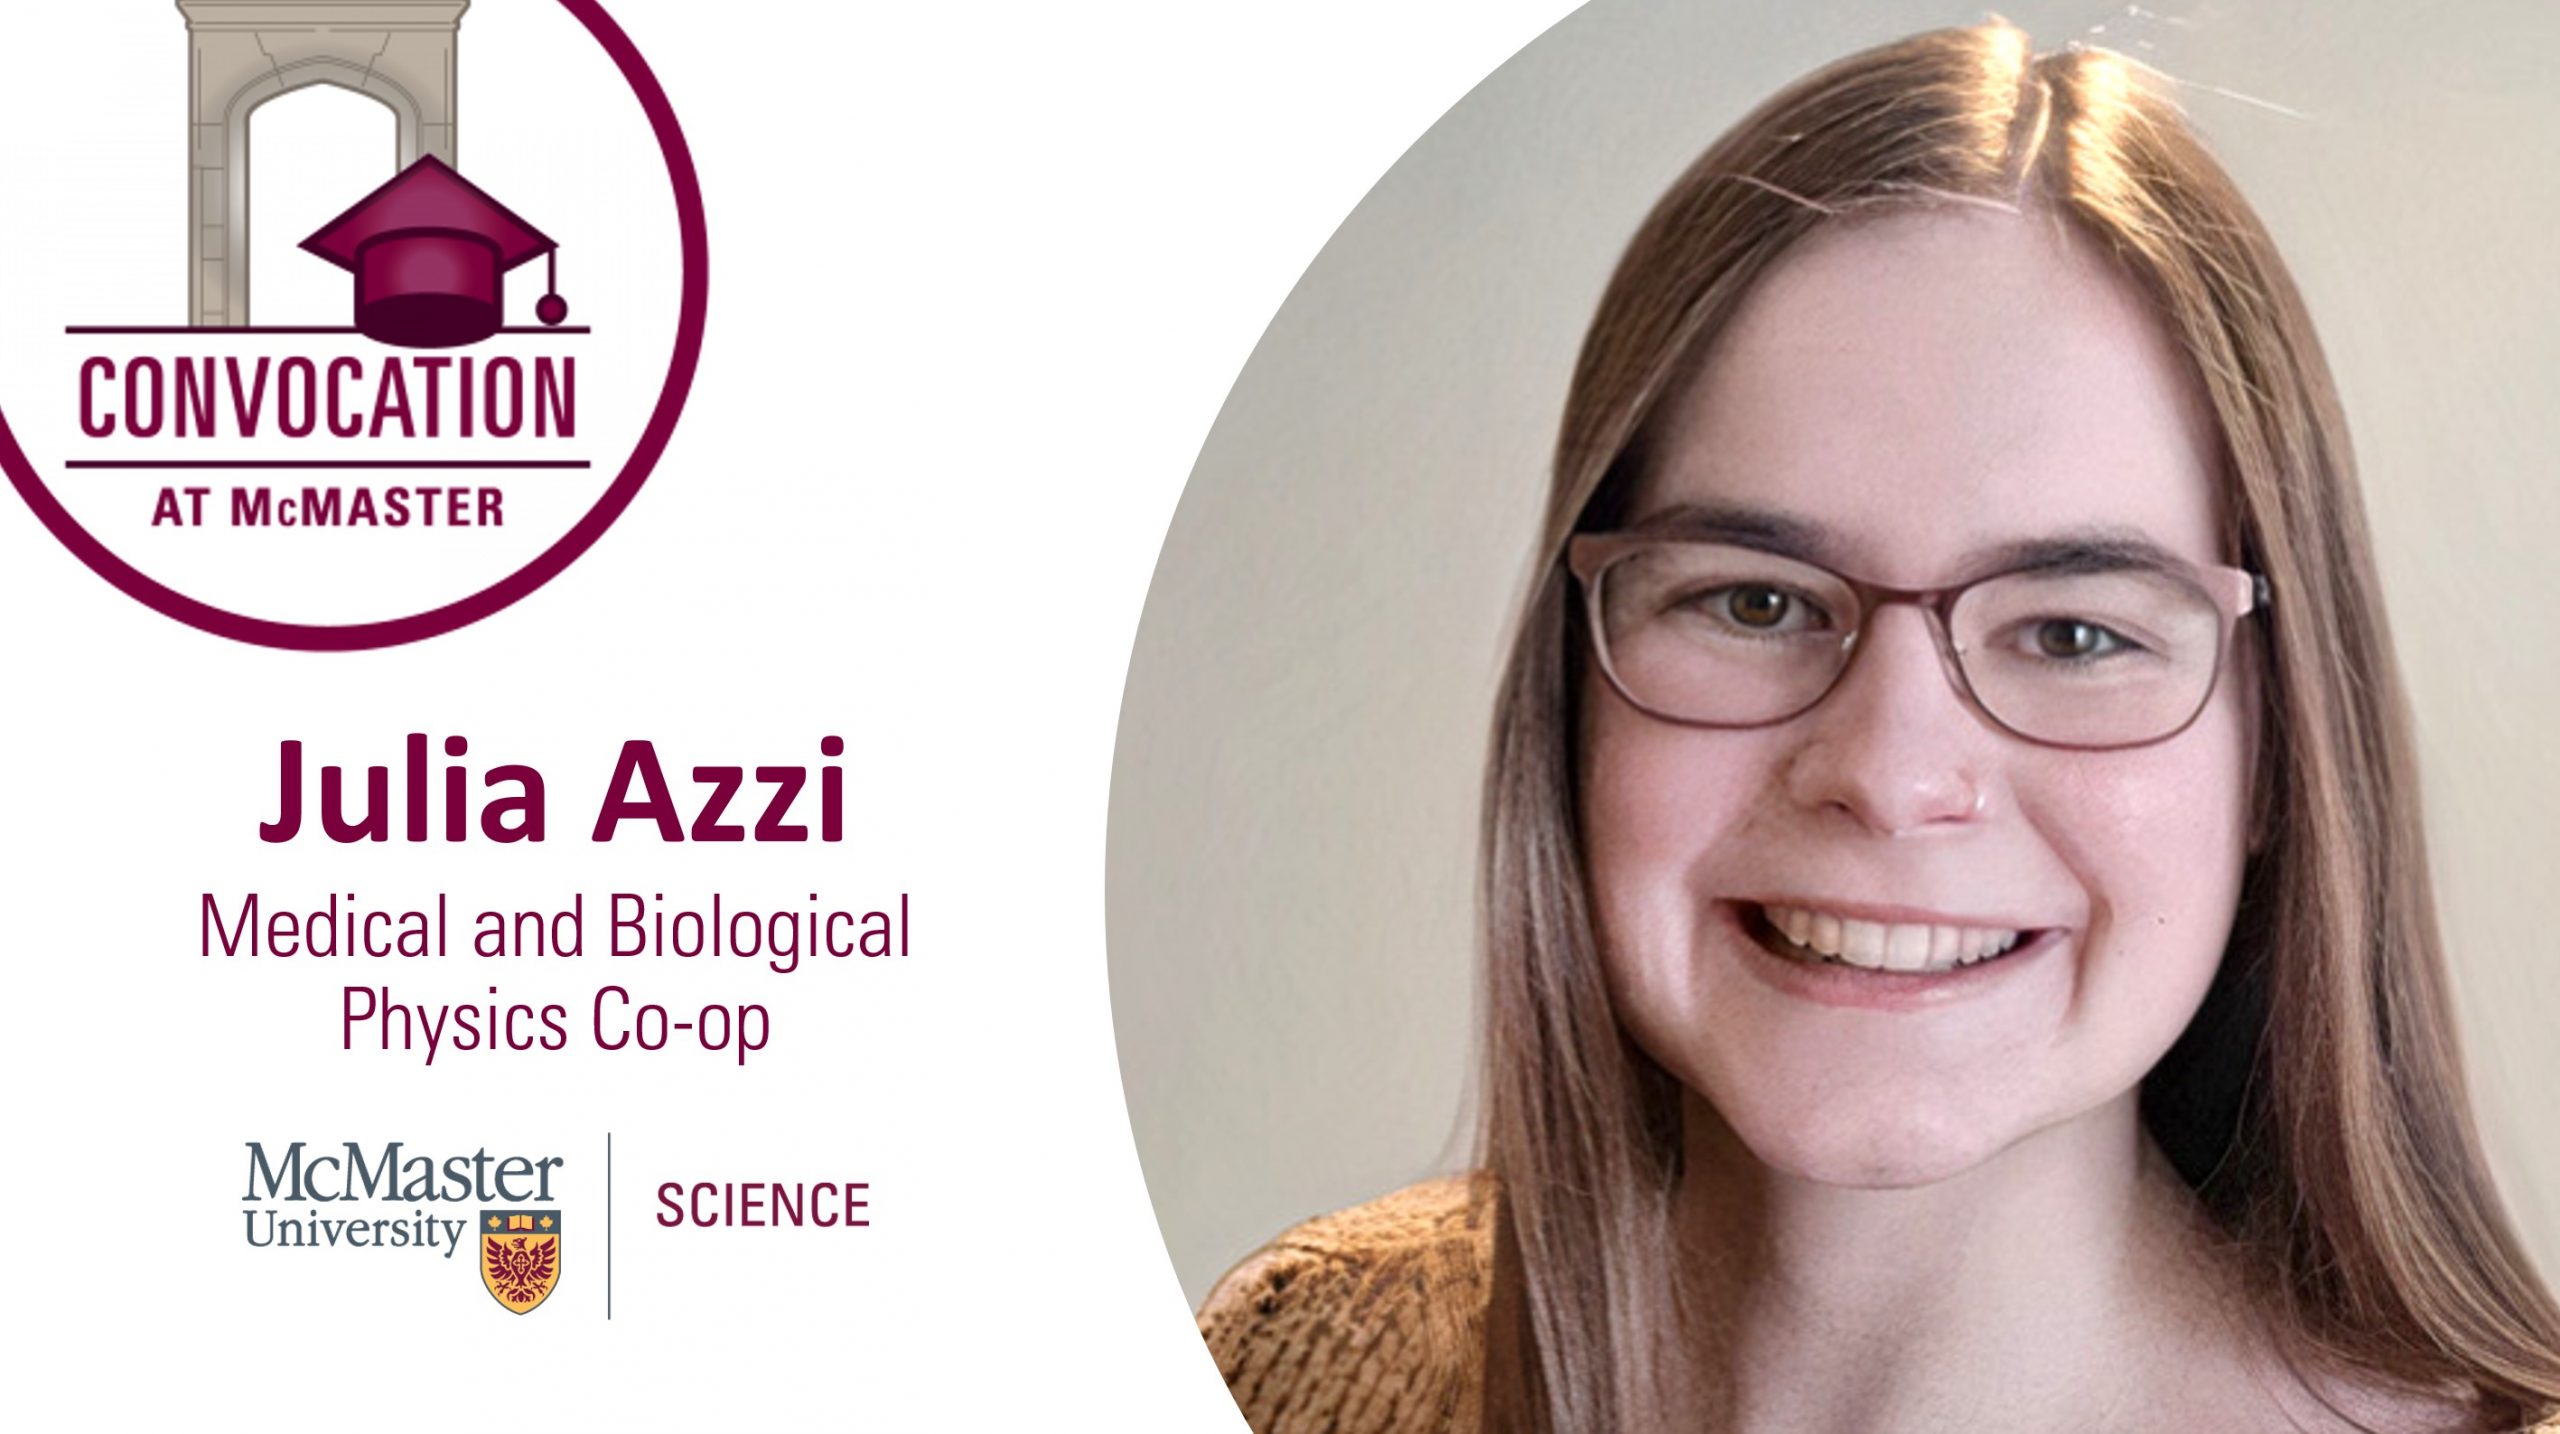 Portrait of Julia Azzi with the convocation logo and mcmaster science logo